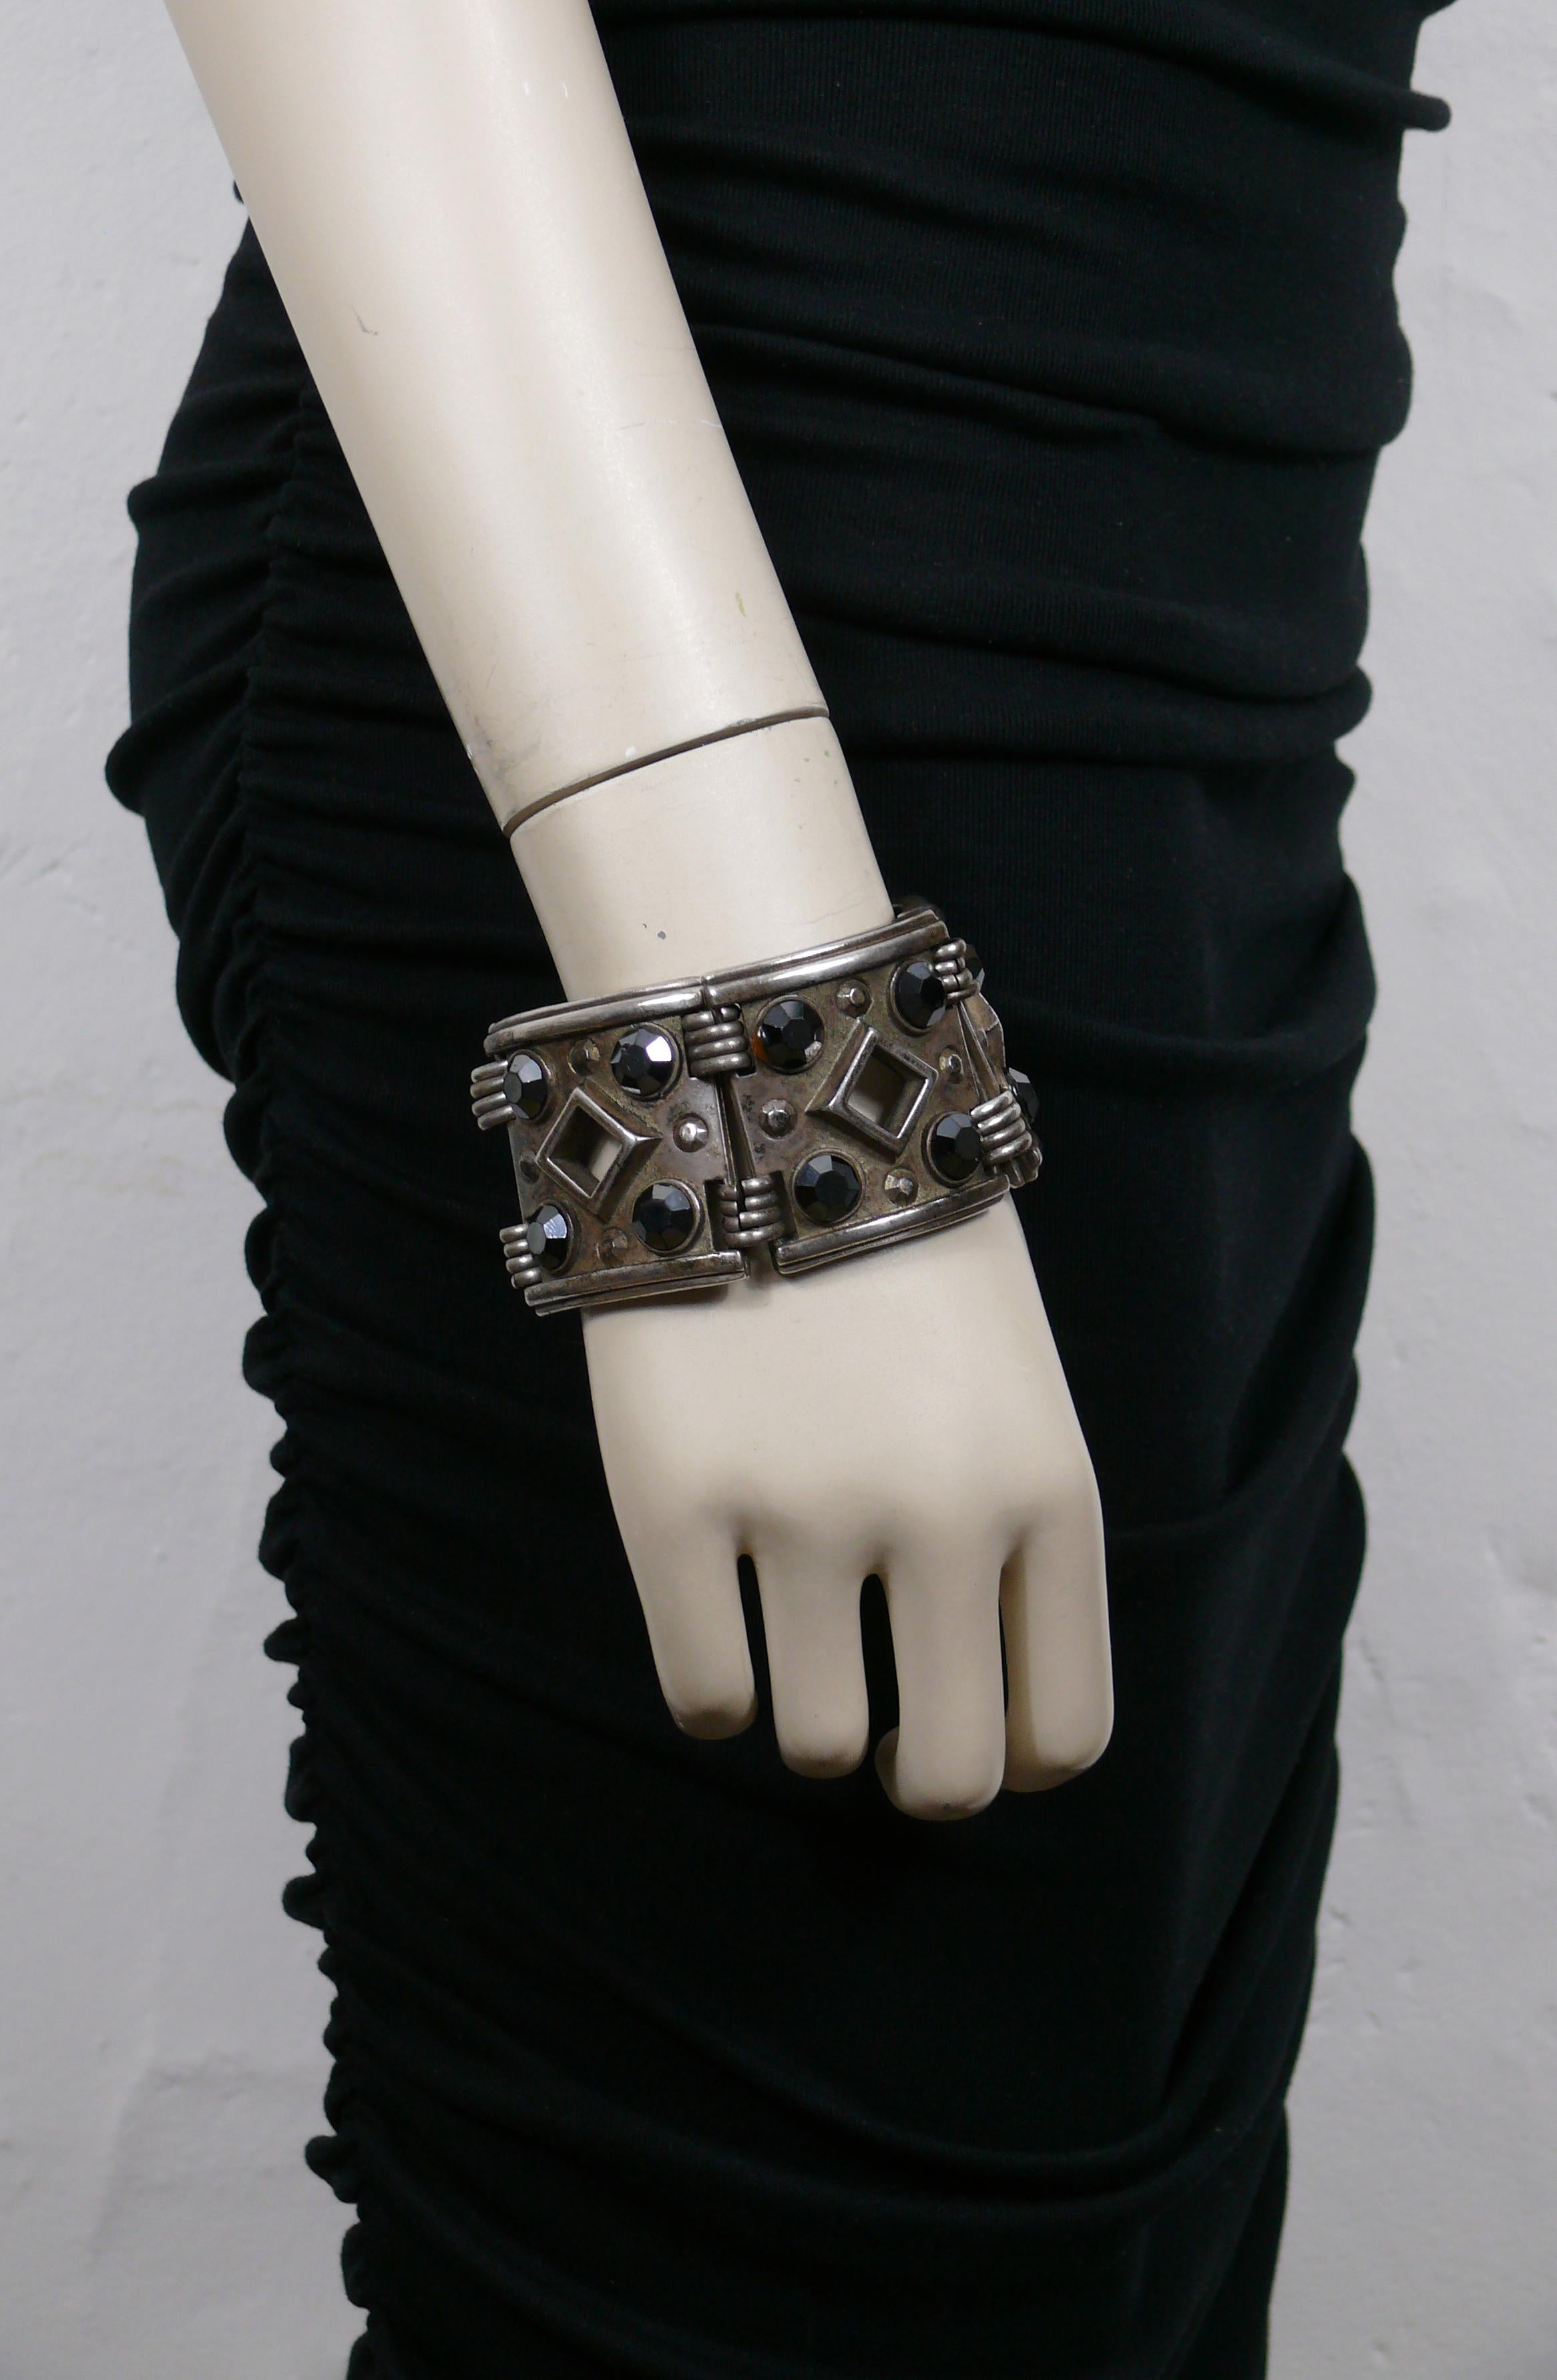 JEAN PAUL GAULTIER vintage antiqued silver tone ethnic cuff bracelet featuring articulated rectangular links embellished with black crystals.

T-bar and toggle closure.

Embossed JPG on the reverse of each link.

Indicative measurements : length